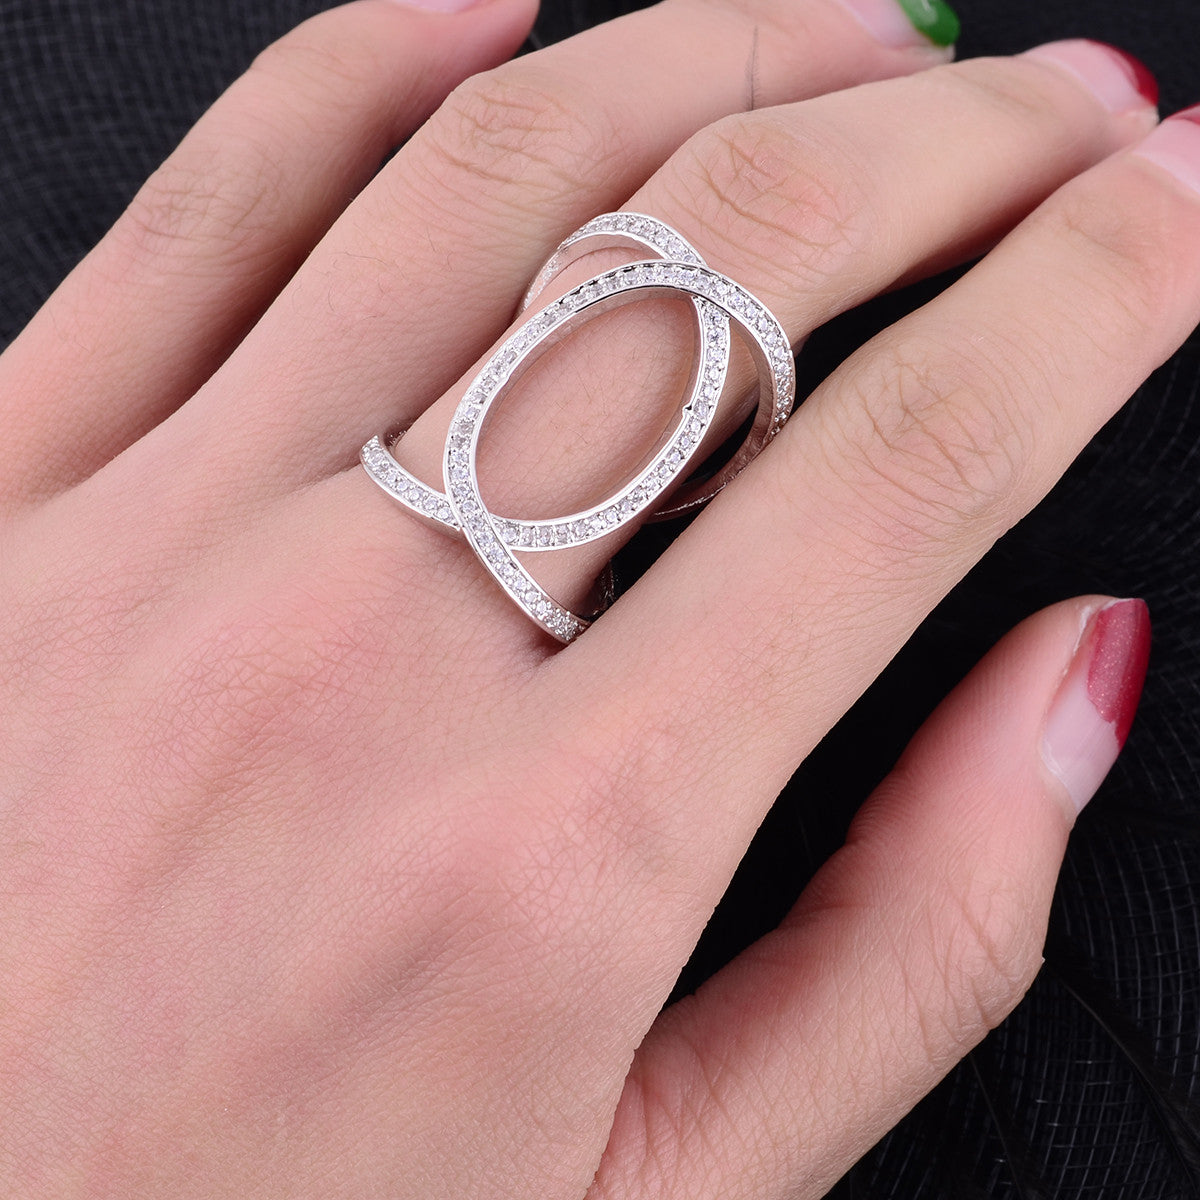 XOXO Diamond Crystal Rings In Rose Gold And Silver Tones